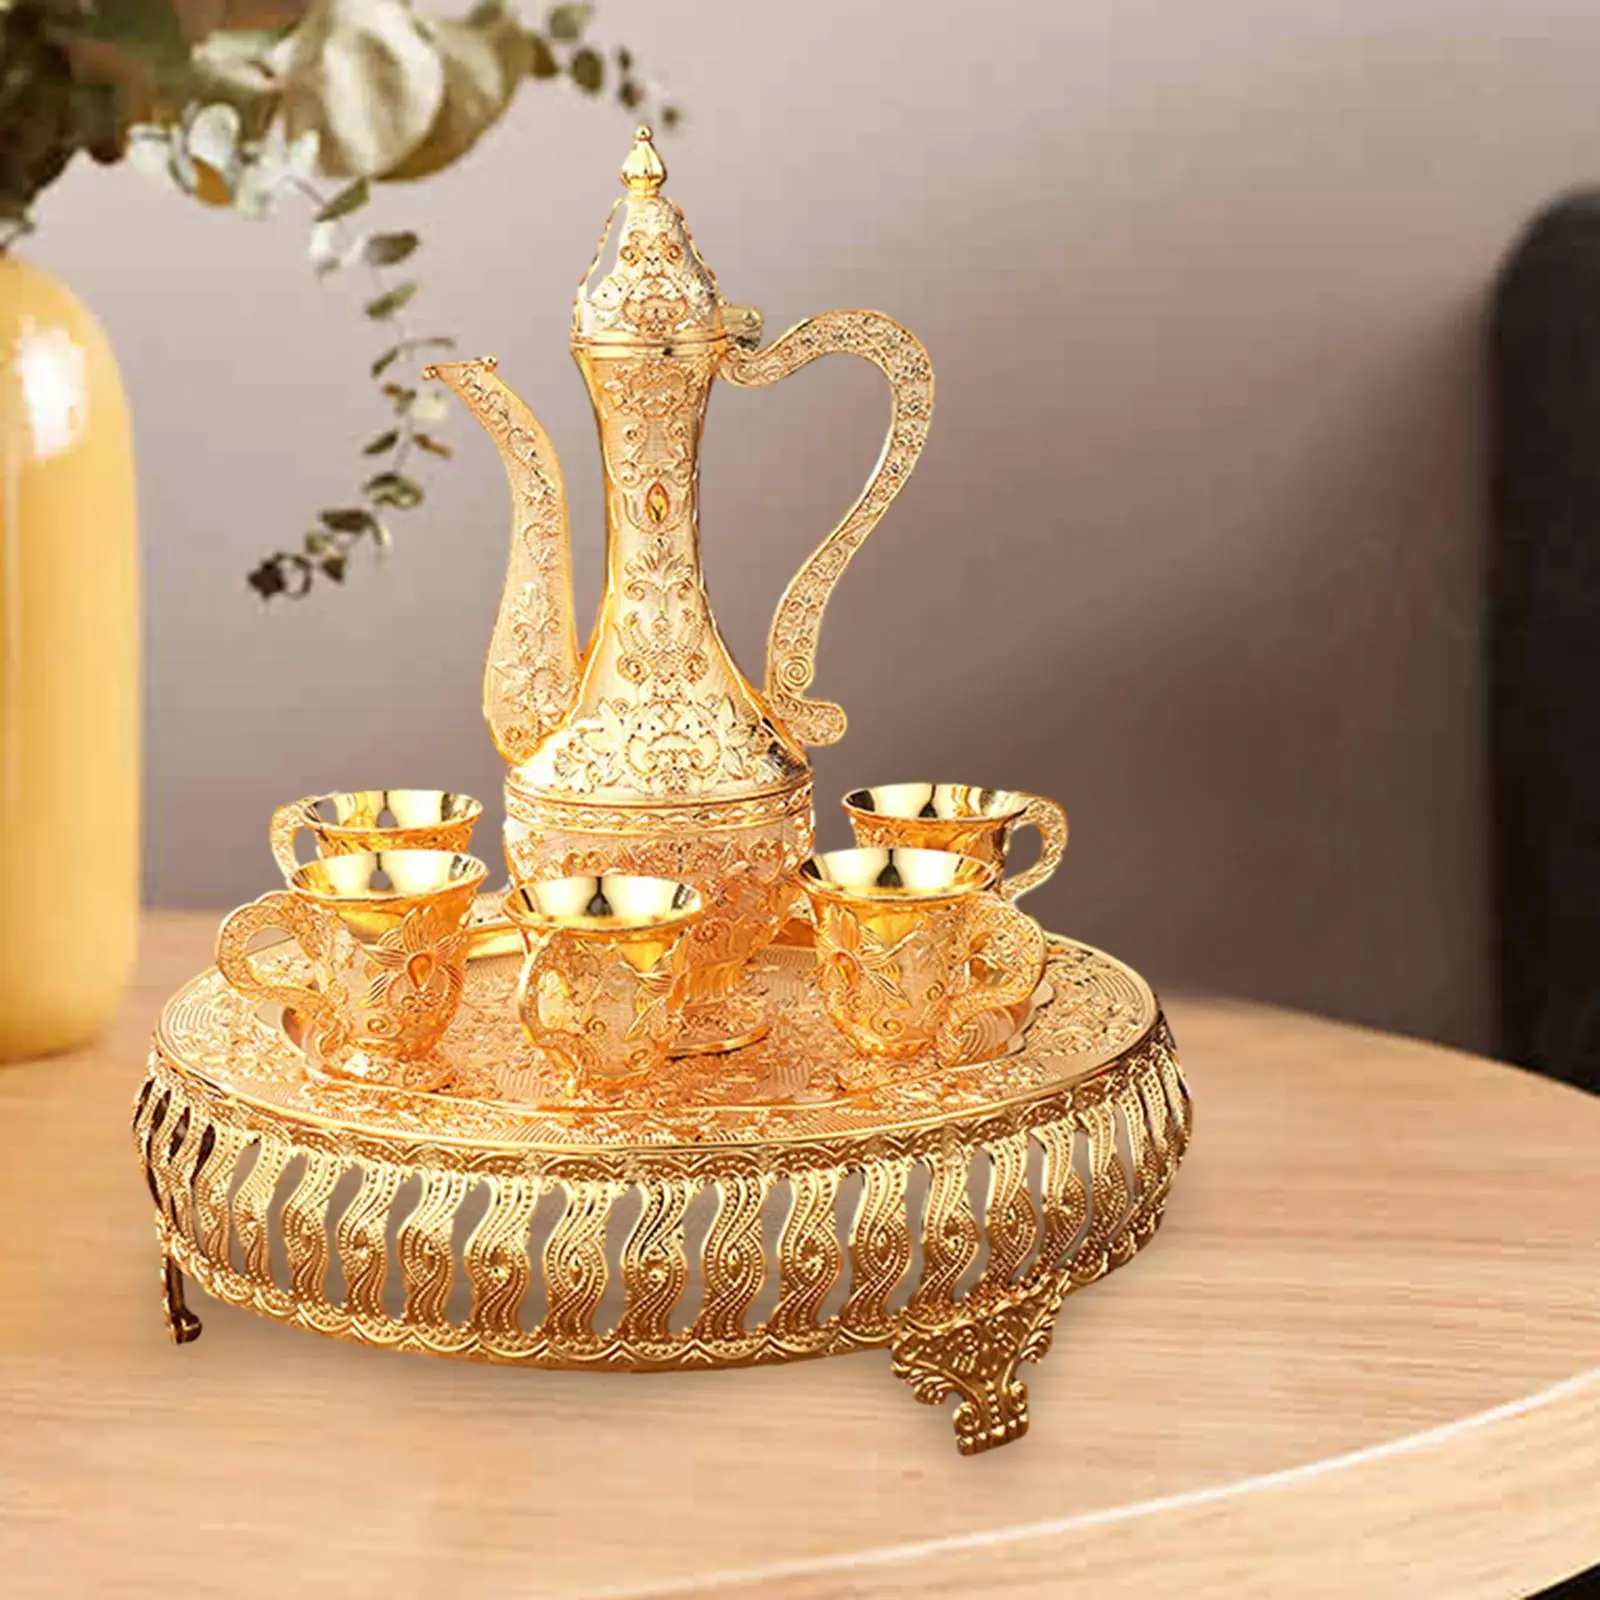 Tea Set with Cups Water Serving Set China Coffee Set for Living Room Home Dining Room Bedroom Decoration